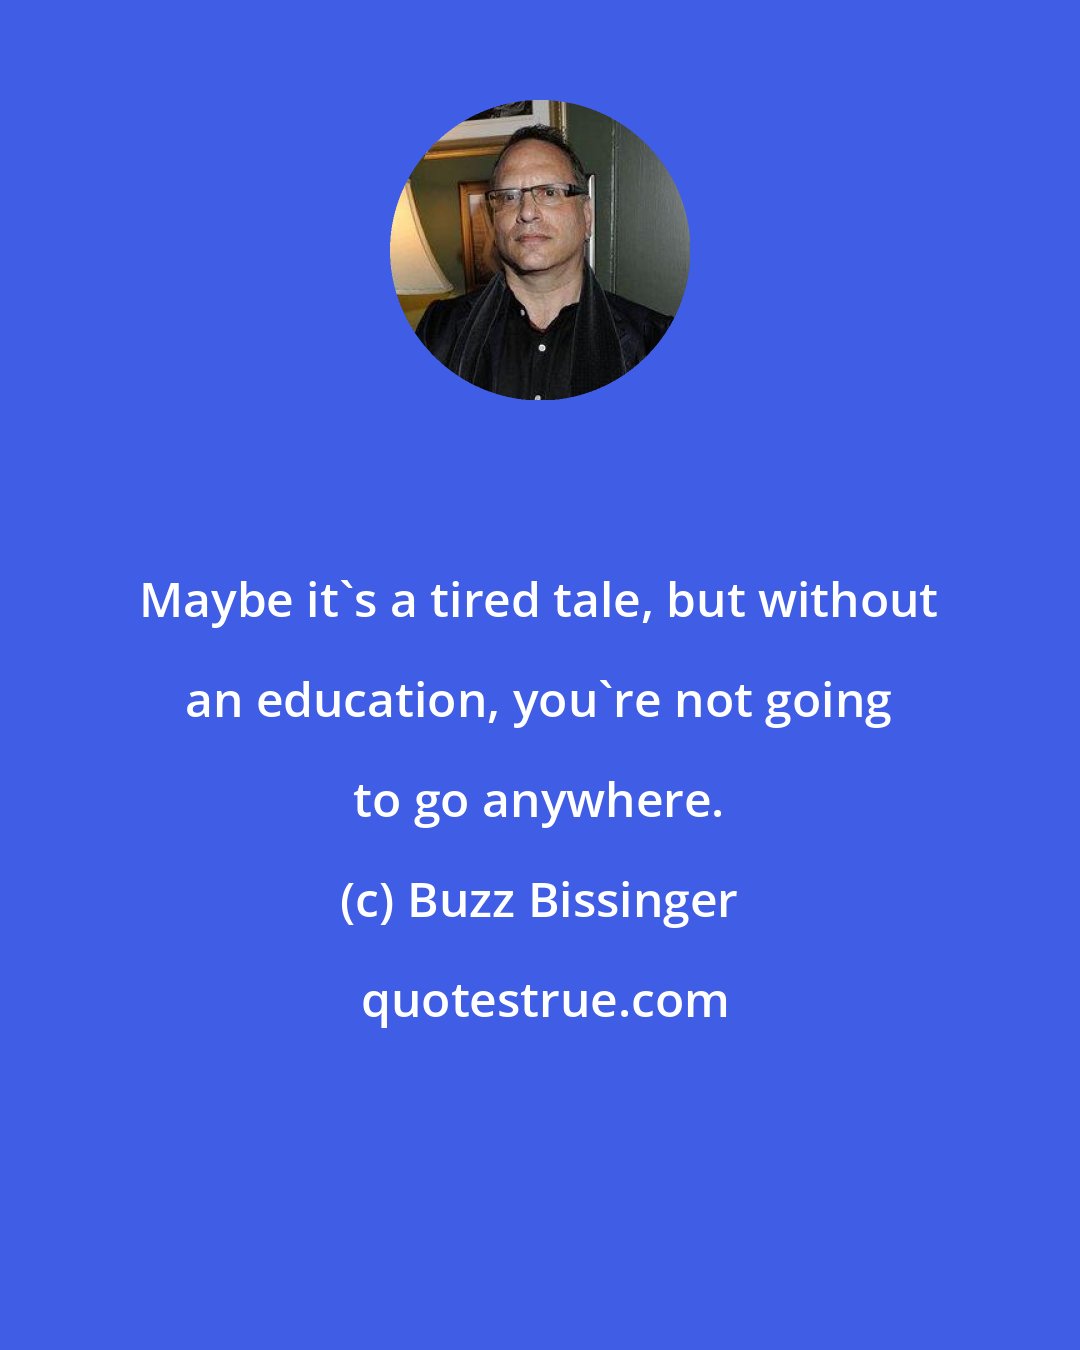 Buzz Bissinger: Maybe it's a tired tale, but without an education, you're not going to go anywhere.